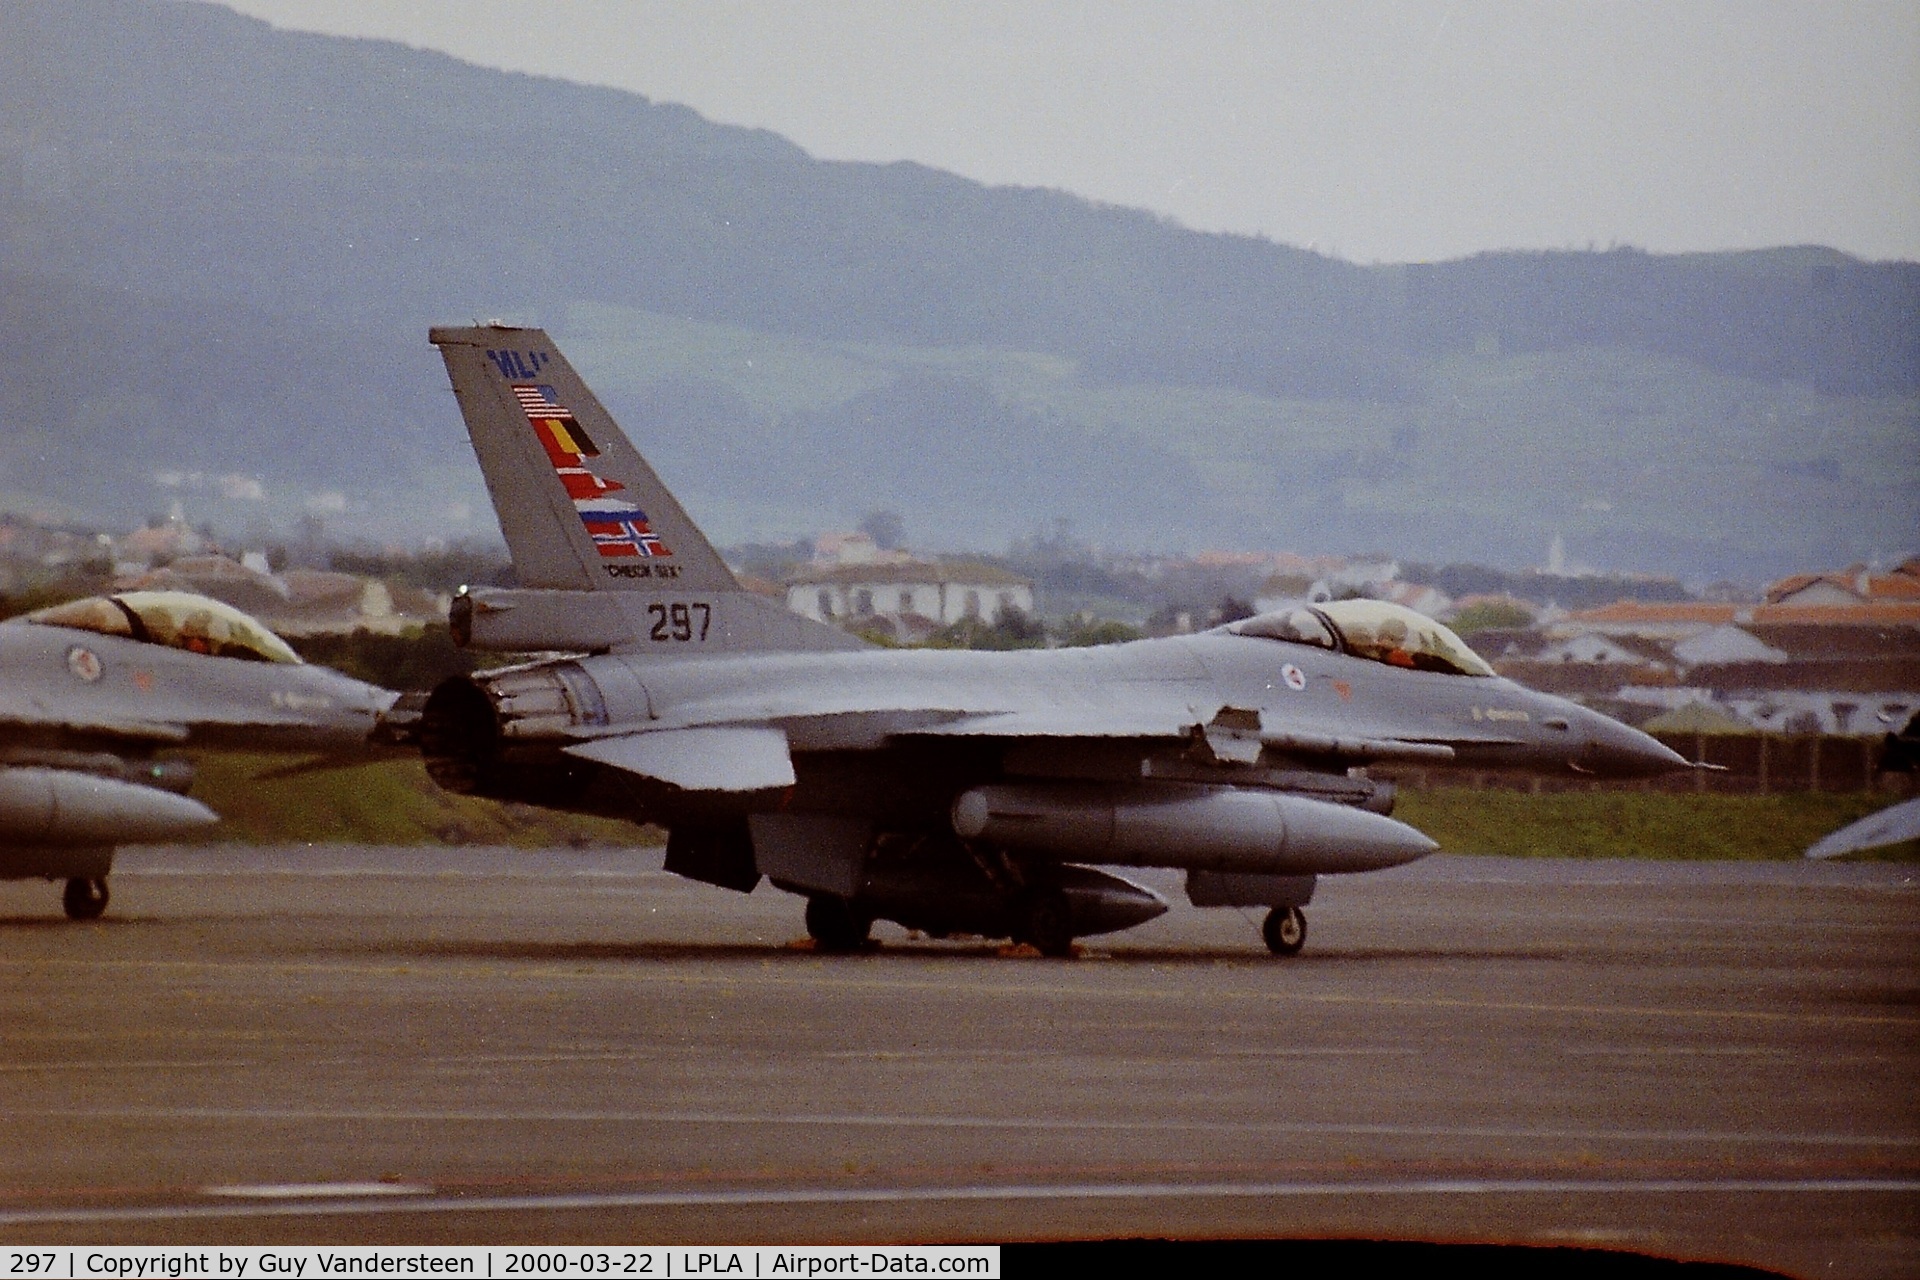 297, General Dynamics F-16AM Fighting Falcon C/N 6K-26, RNoAF F-16A 297 at Ljes Airfield en route to Red Flag 2000-3